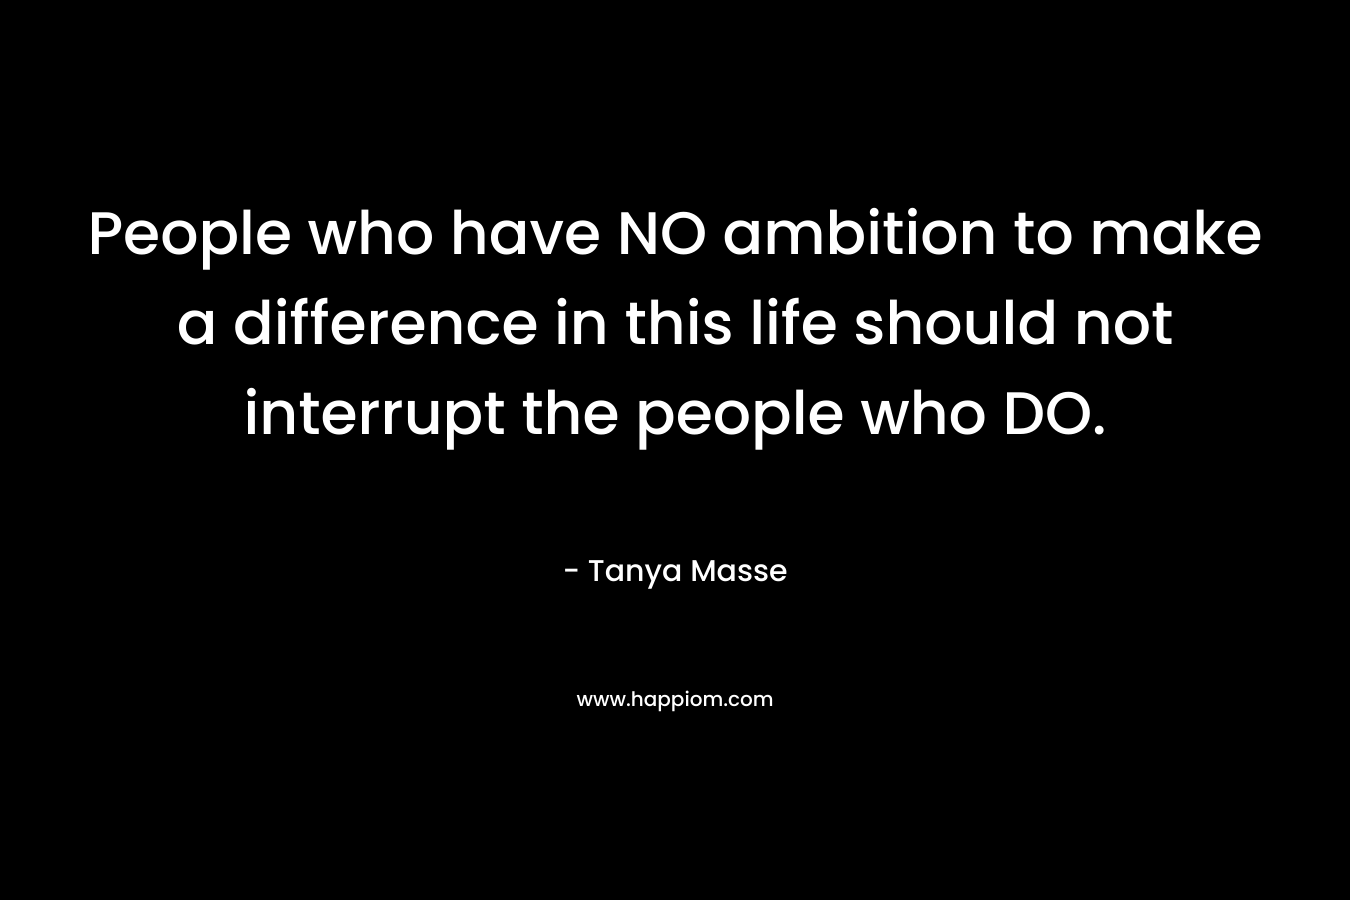 People who have NO ambition to make a difference in this life should not interrupt the people who DO.